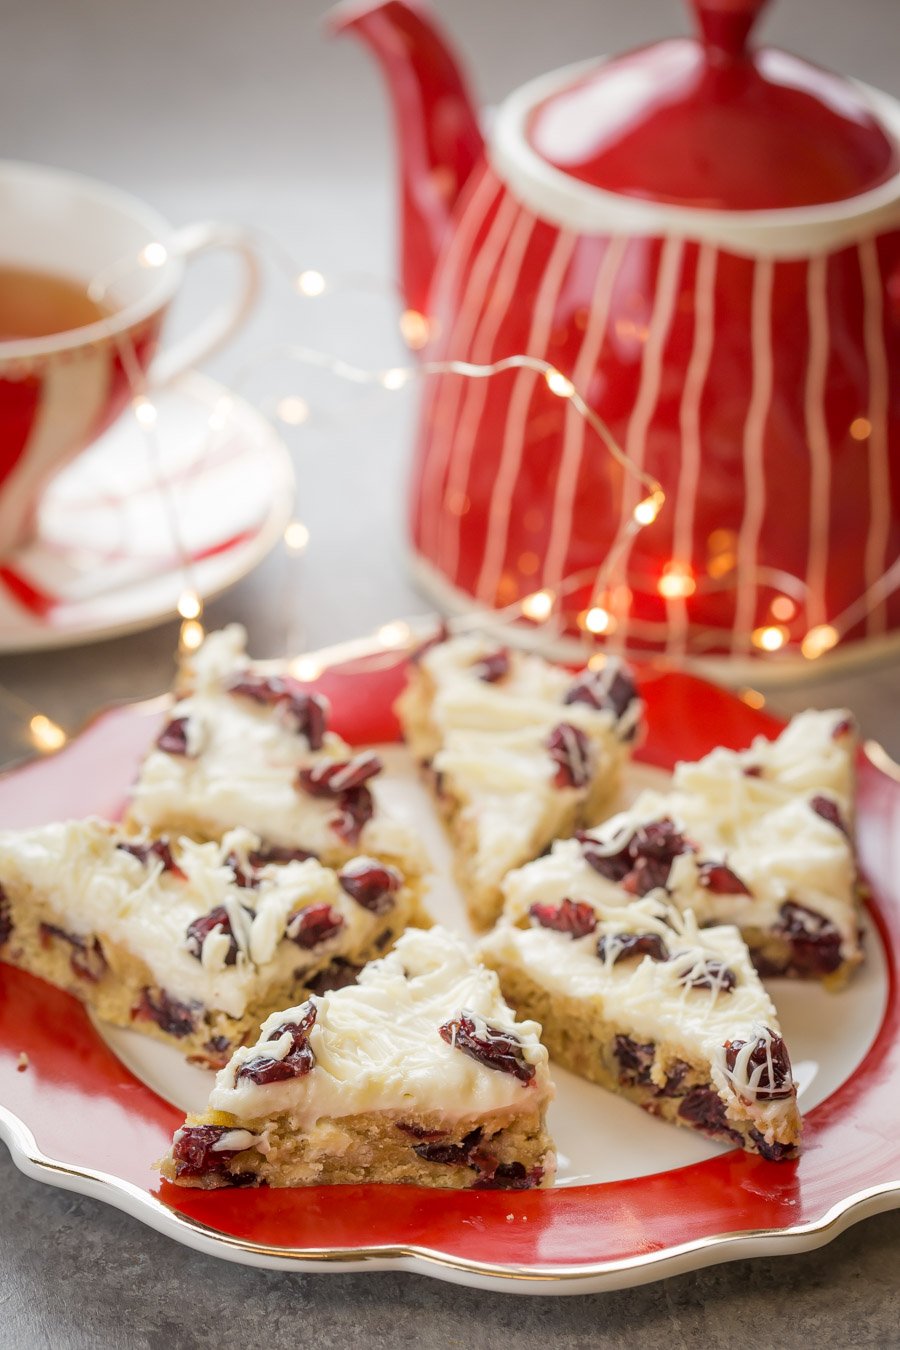 Cranberry bars topped with cranberries and white chocolate on a plate.